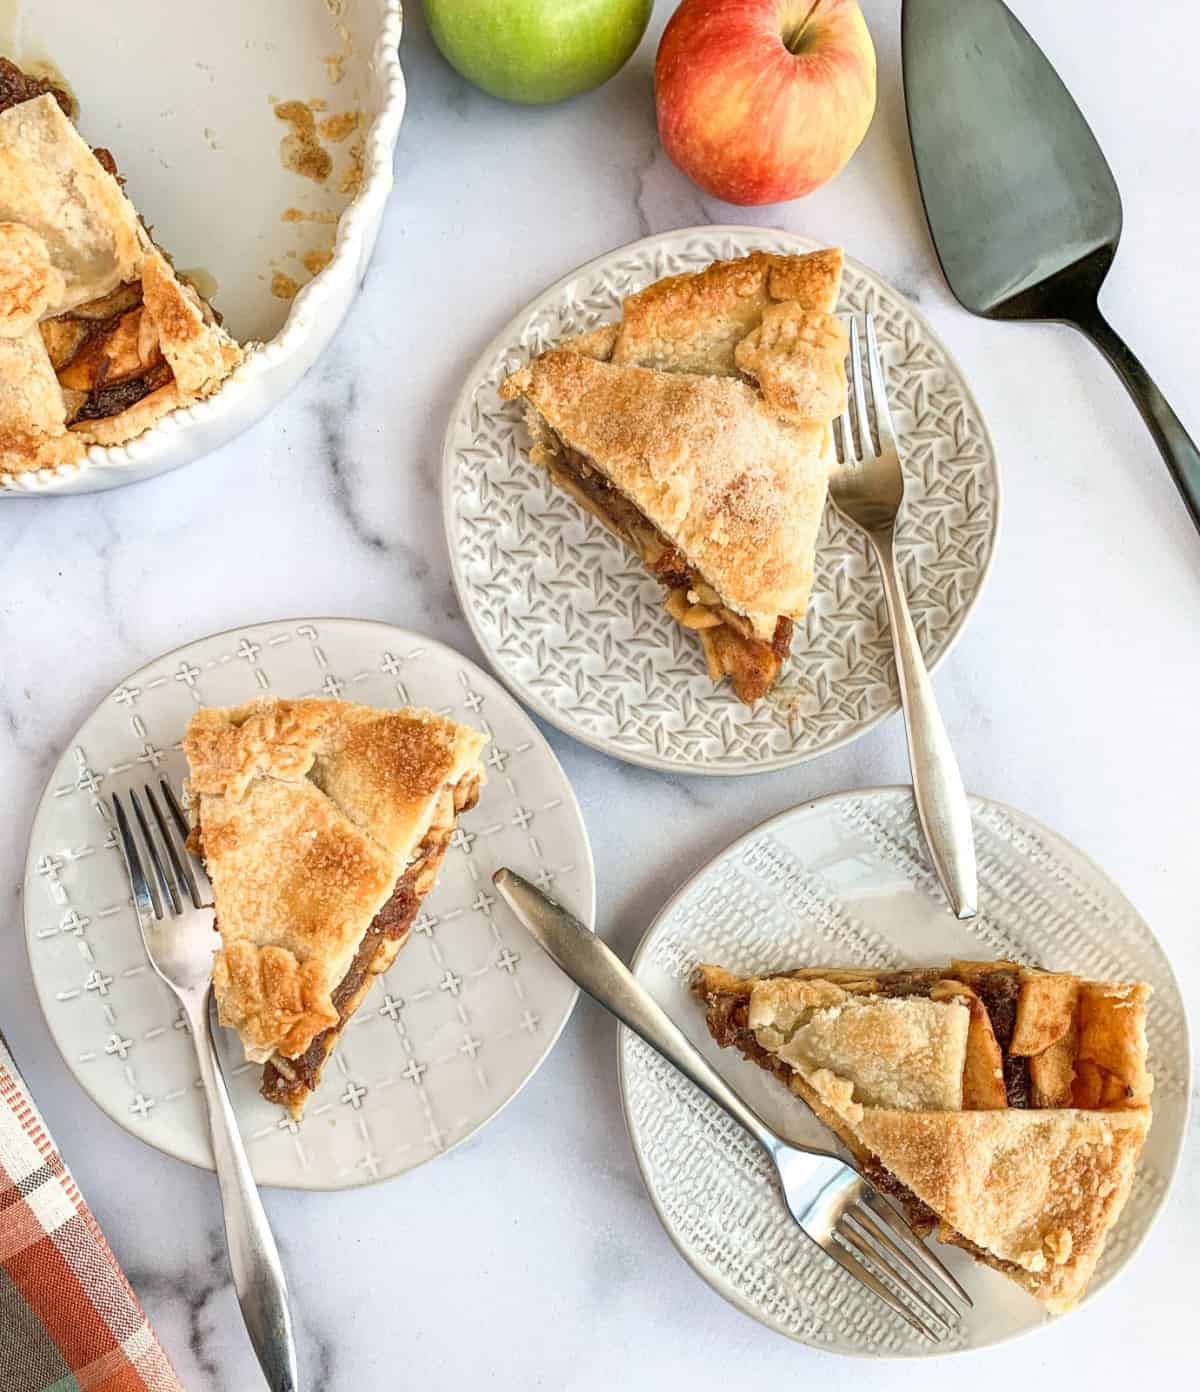 Top view of three slices of Apple Date Pie on textured plates, each with a silver fork.